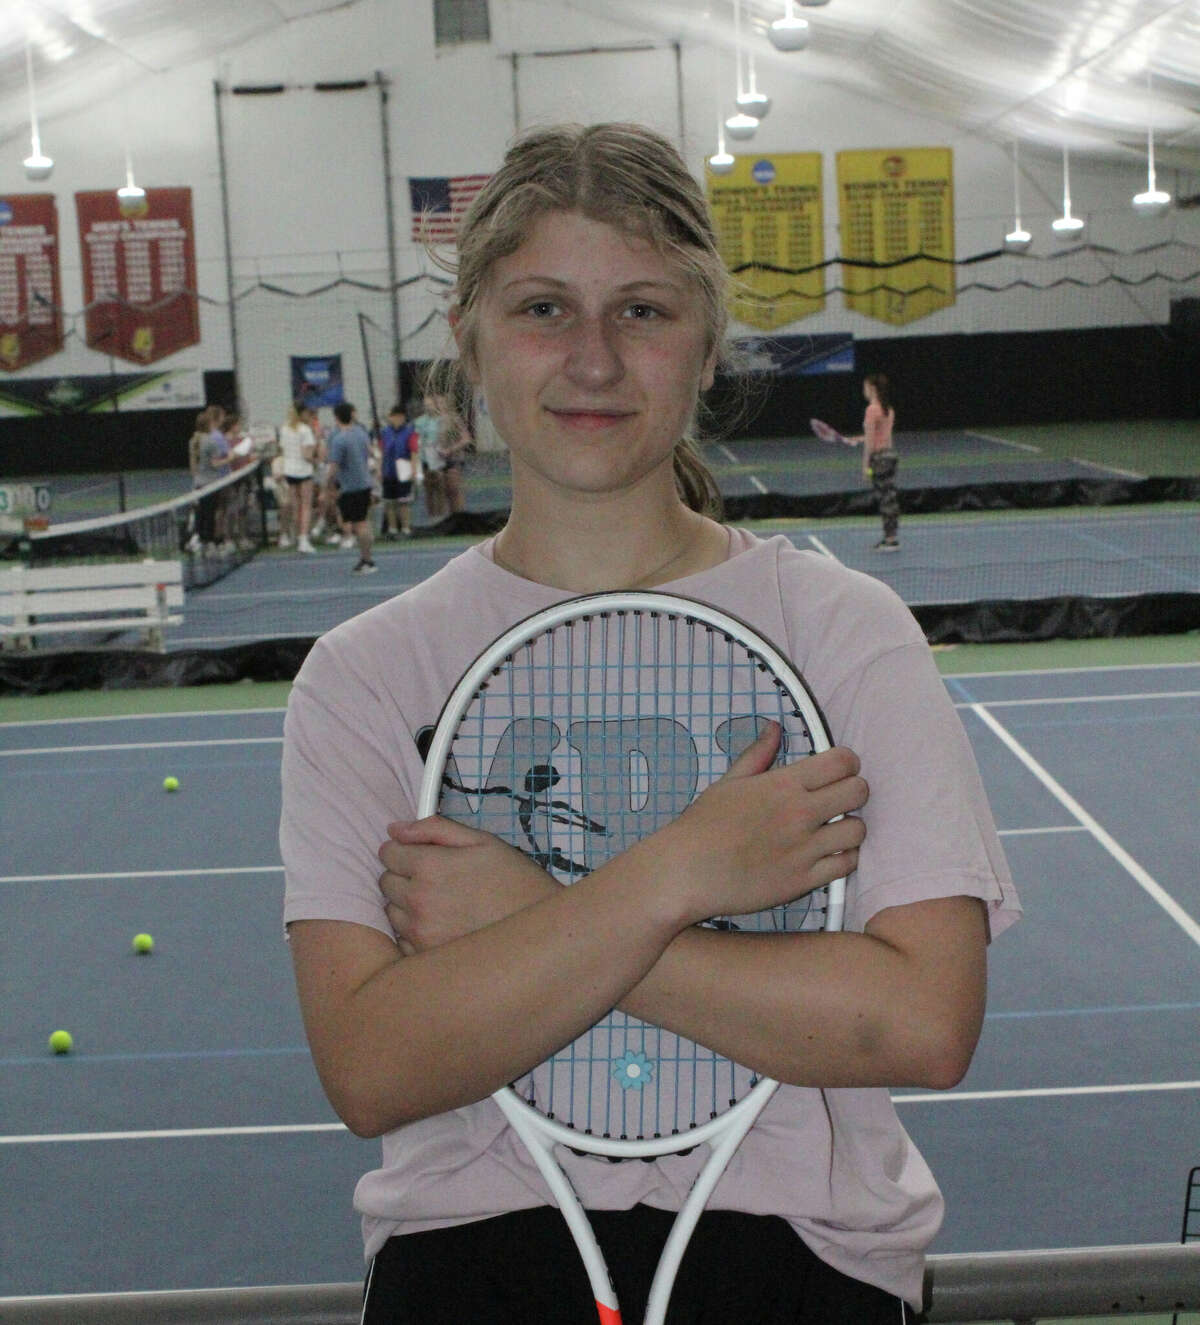 Addy Mossel picked up a win at No. 1 singles on Wednesday for Big Rapids.